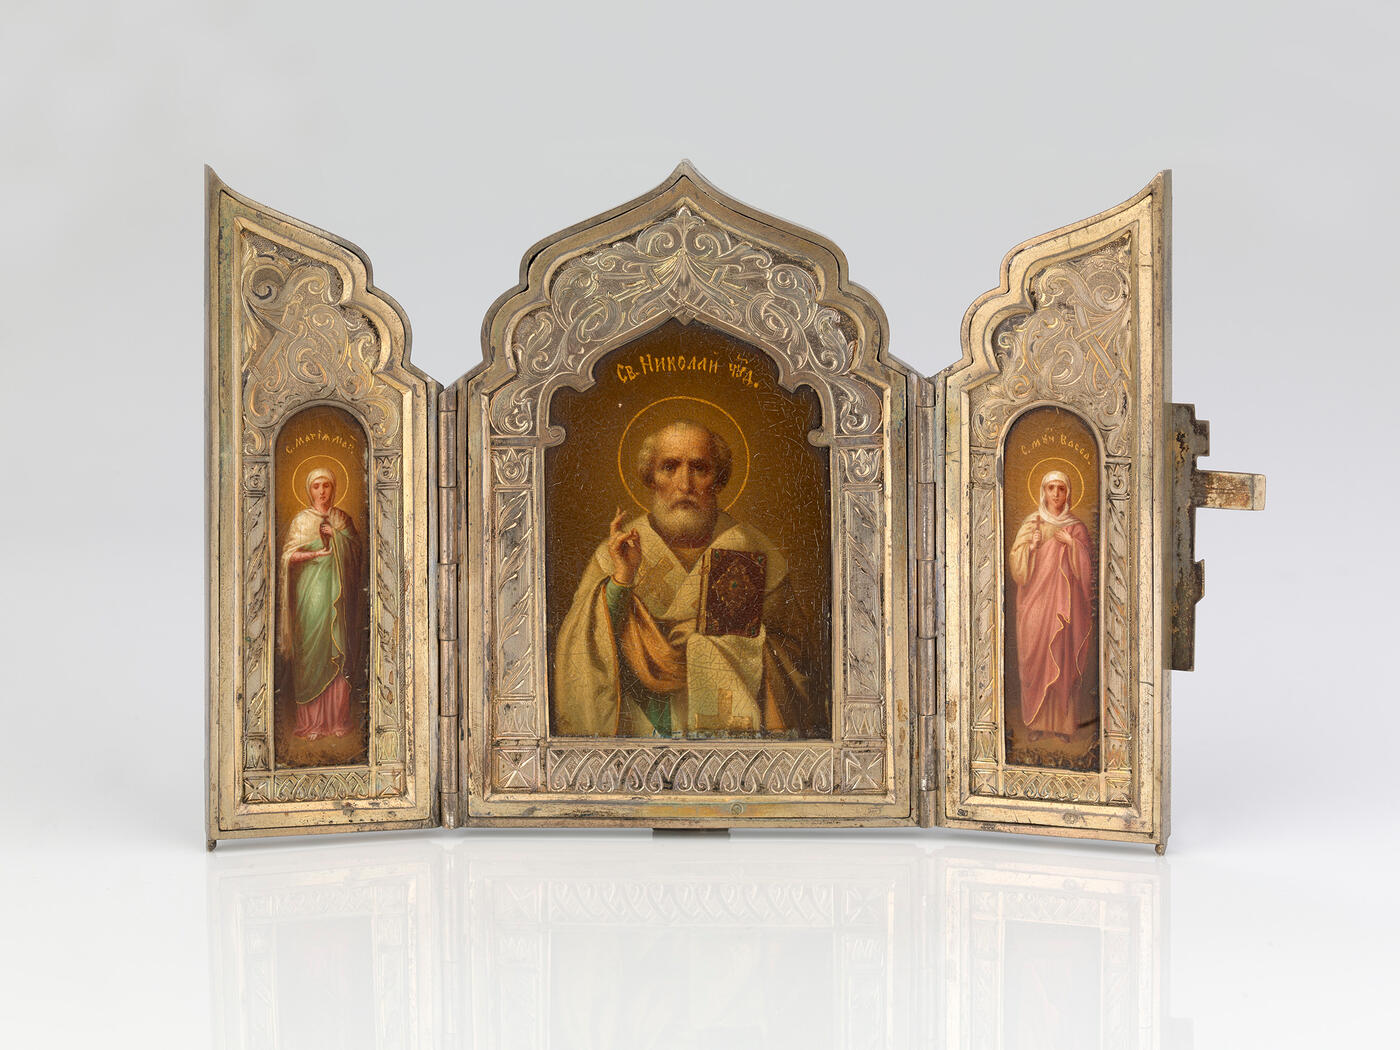 A Miniature Silver Triptych with Nicholas the Miracle-Worker, Maria Magdalena and Holy Martyr Vassa